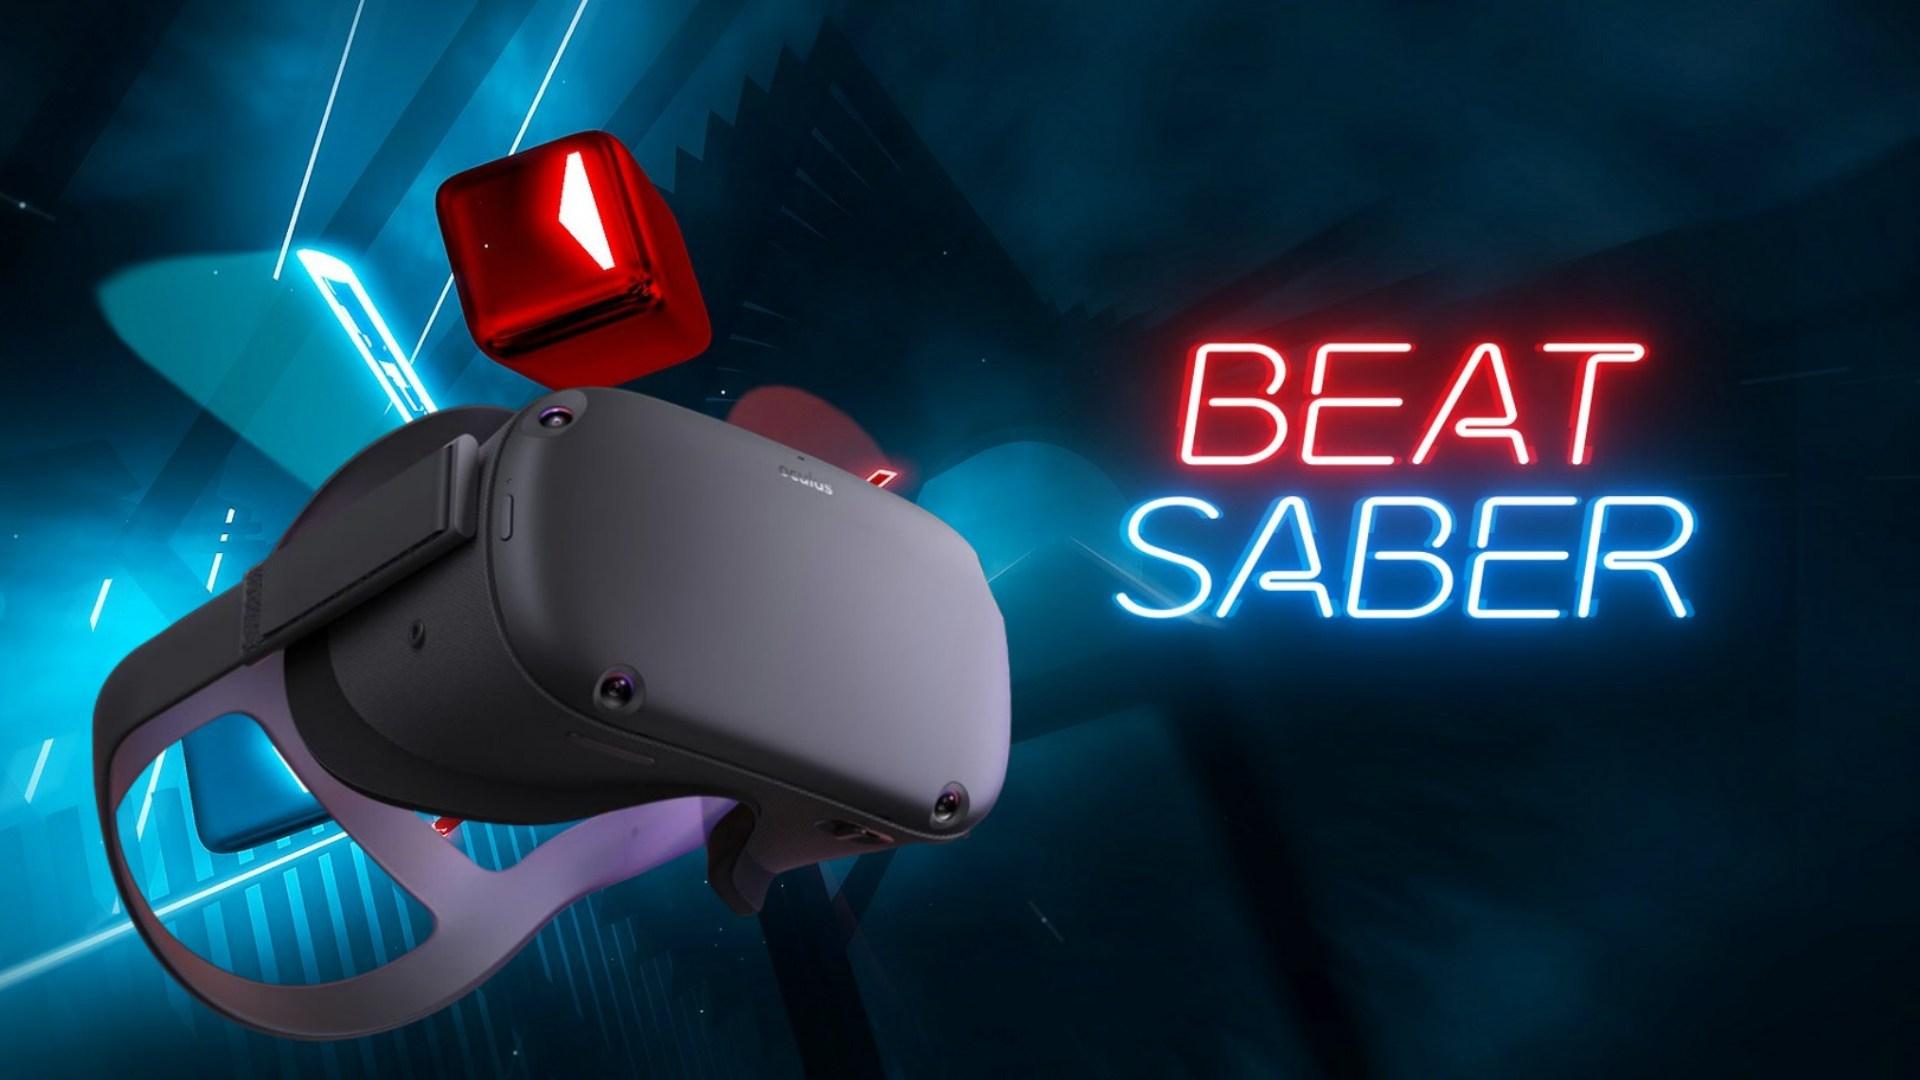 GDC 2019 Rewind: Hands On With 'Beat Saber' For Oculus Quest